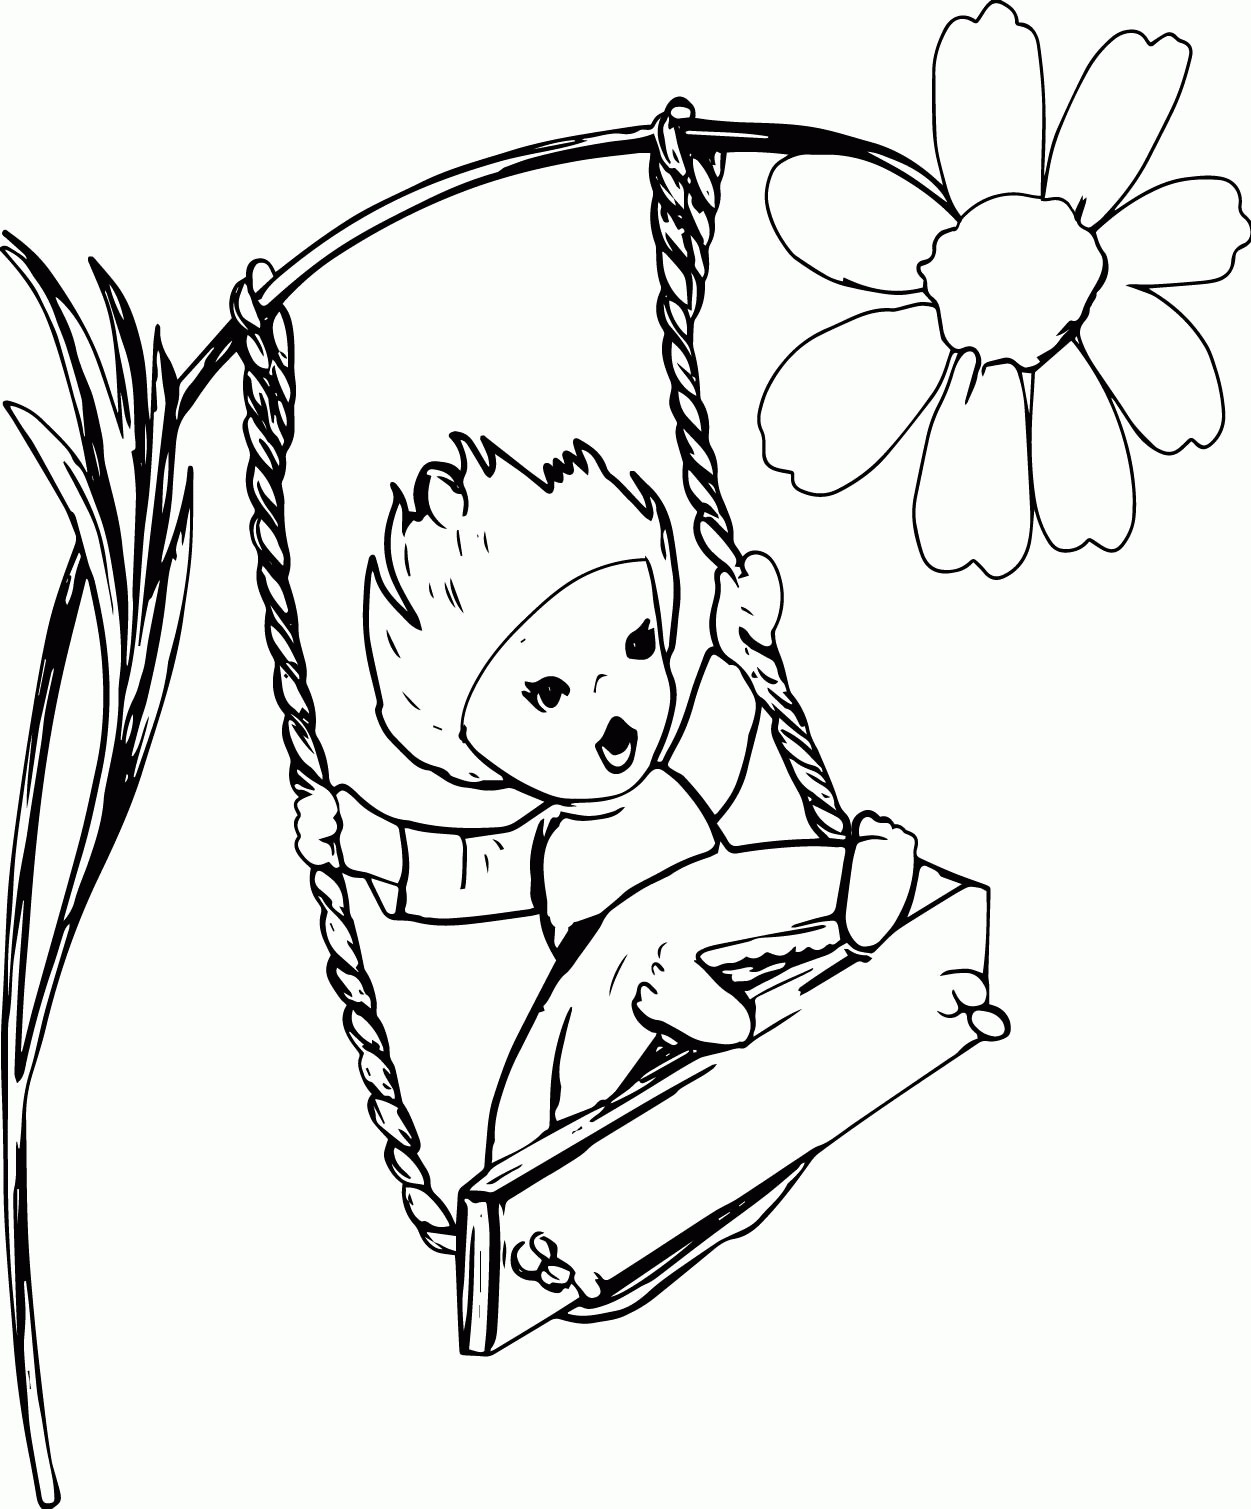 Swing Set Pages Coloring Pages